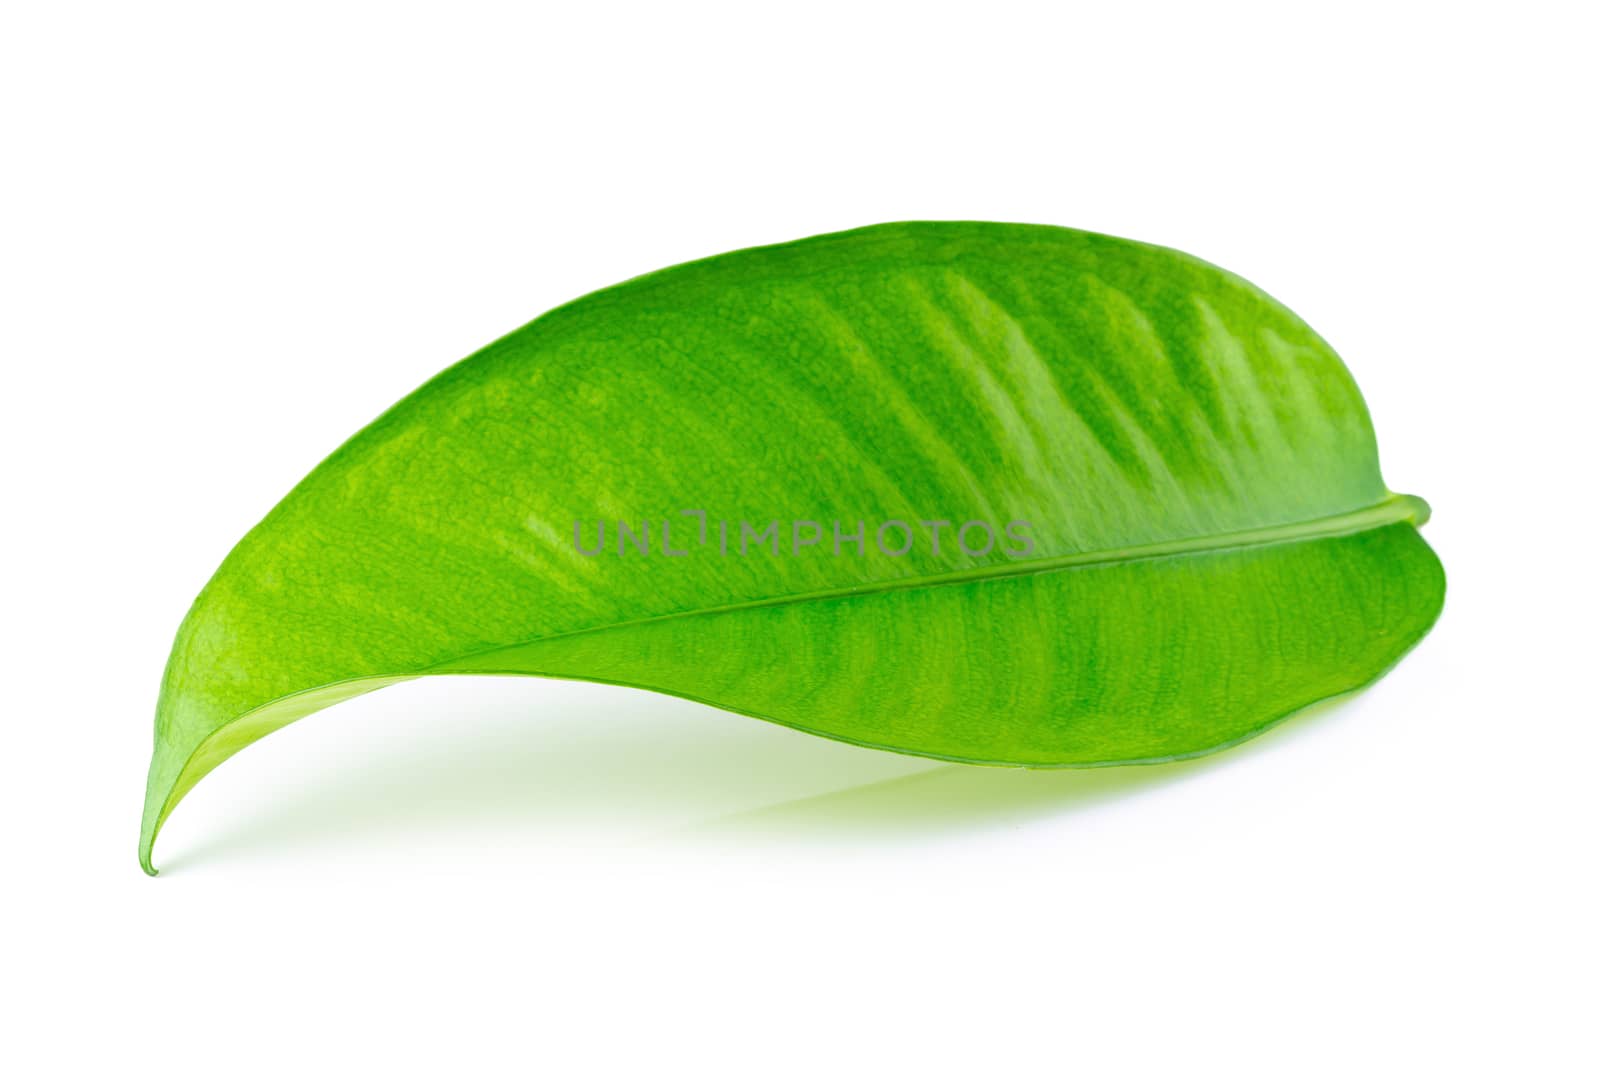 Mangosteen leaves isolated over a white background.